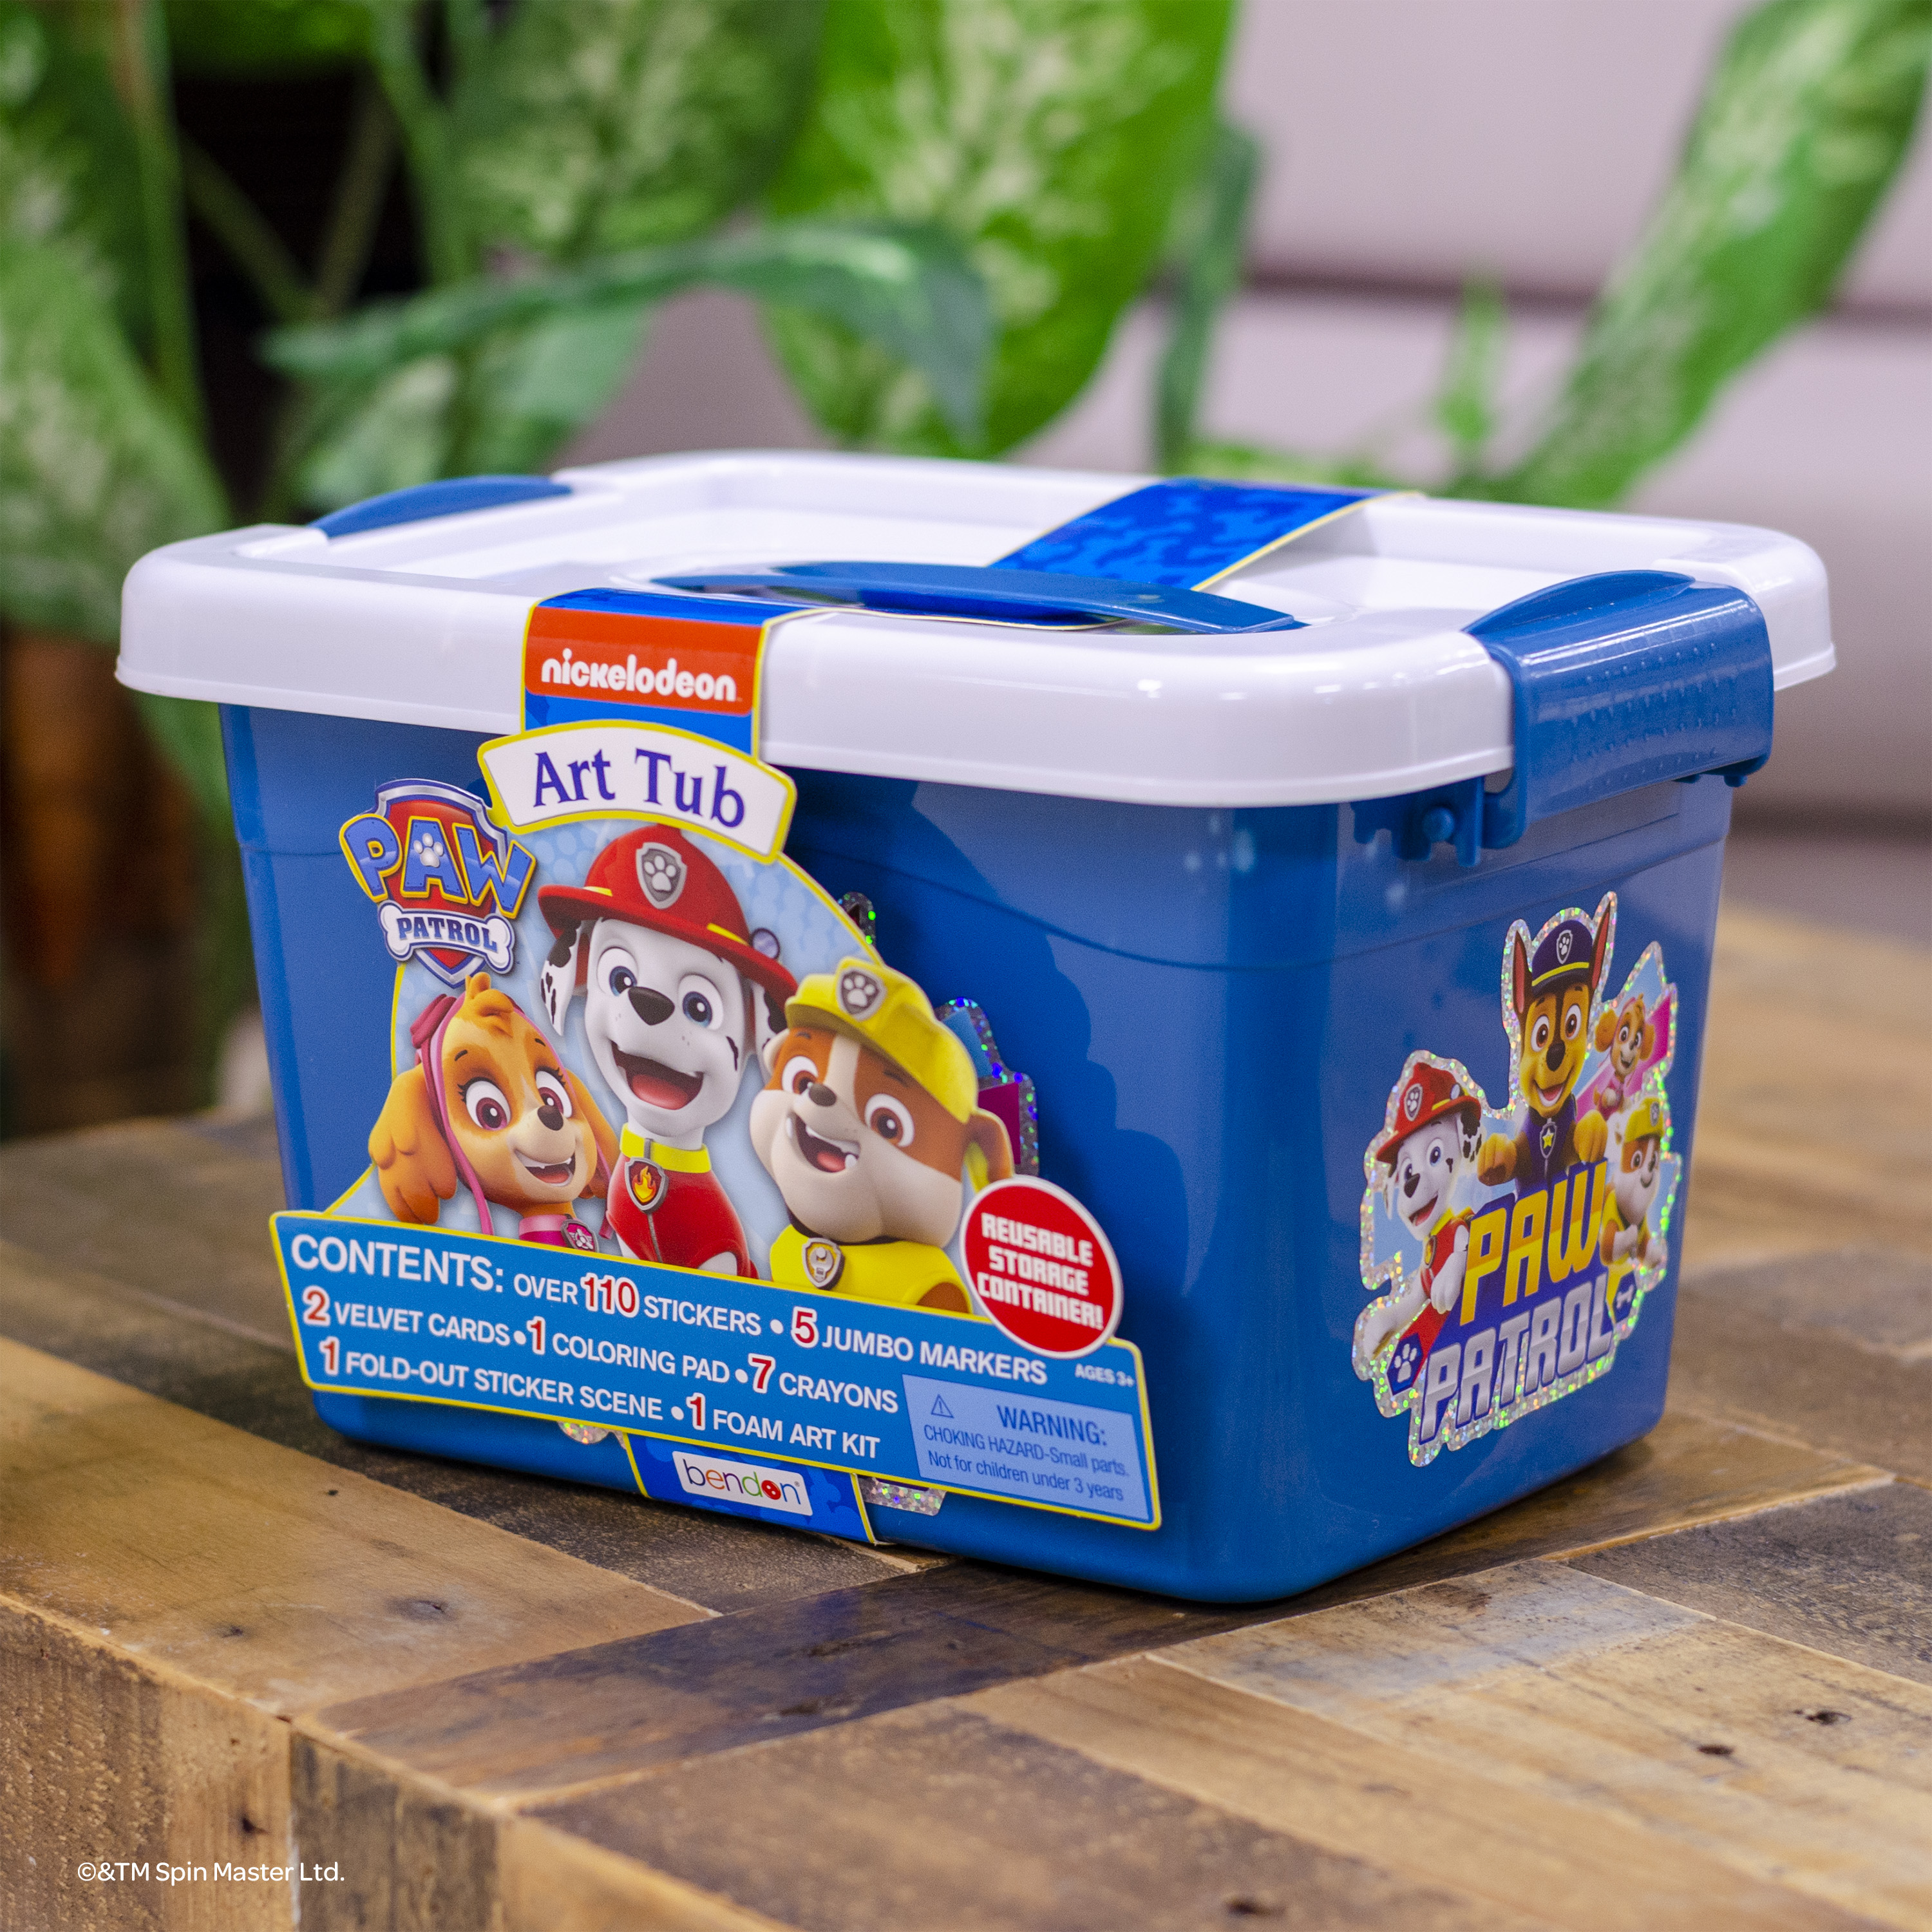 PAW Patrol Art Tub with a Coloring Book and Coloring Supplies - image 3 of 9